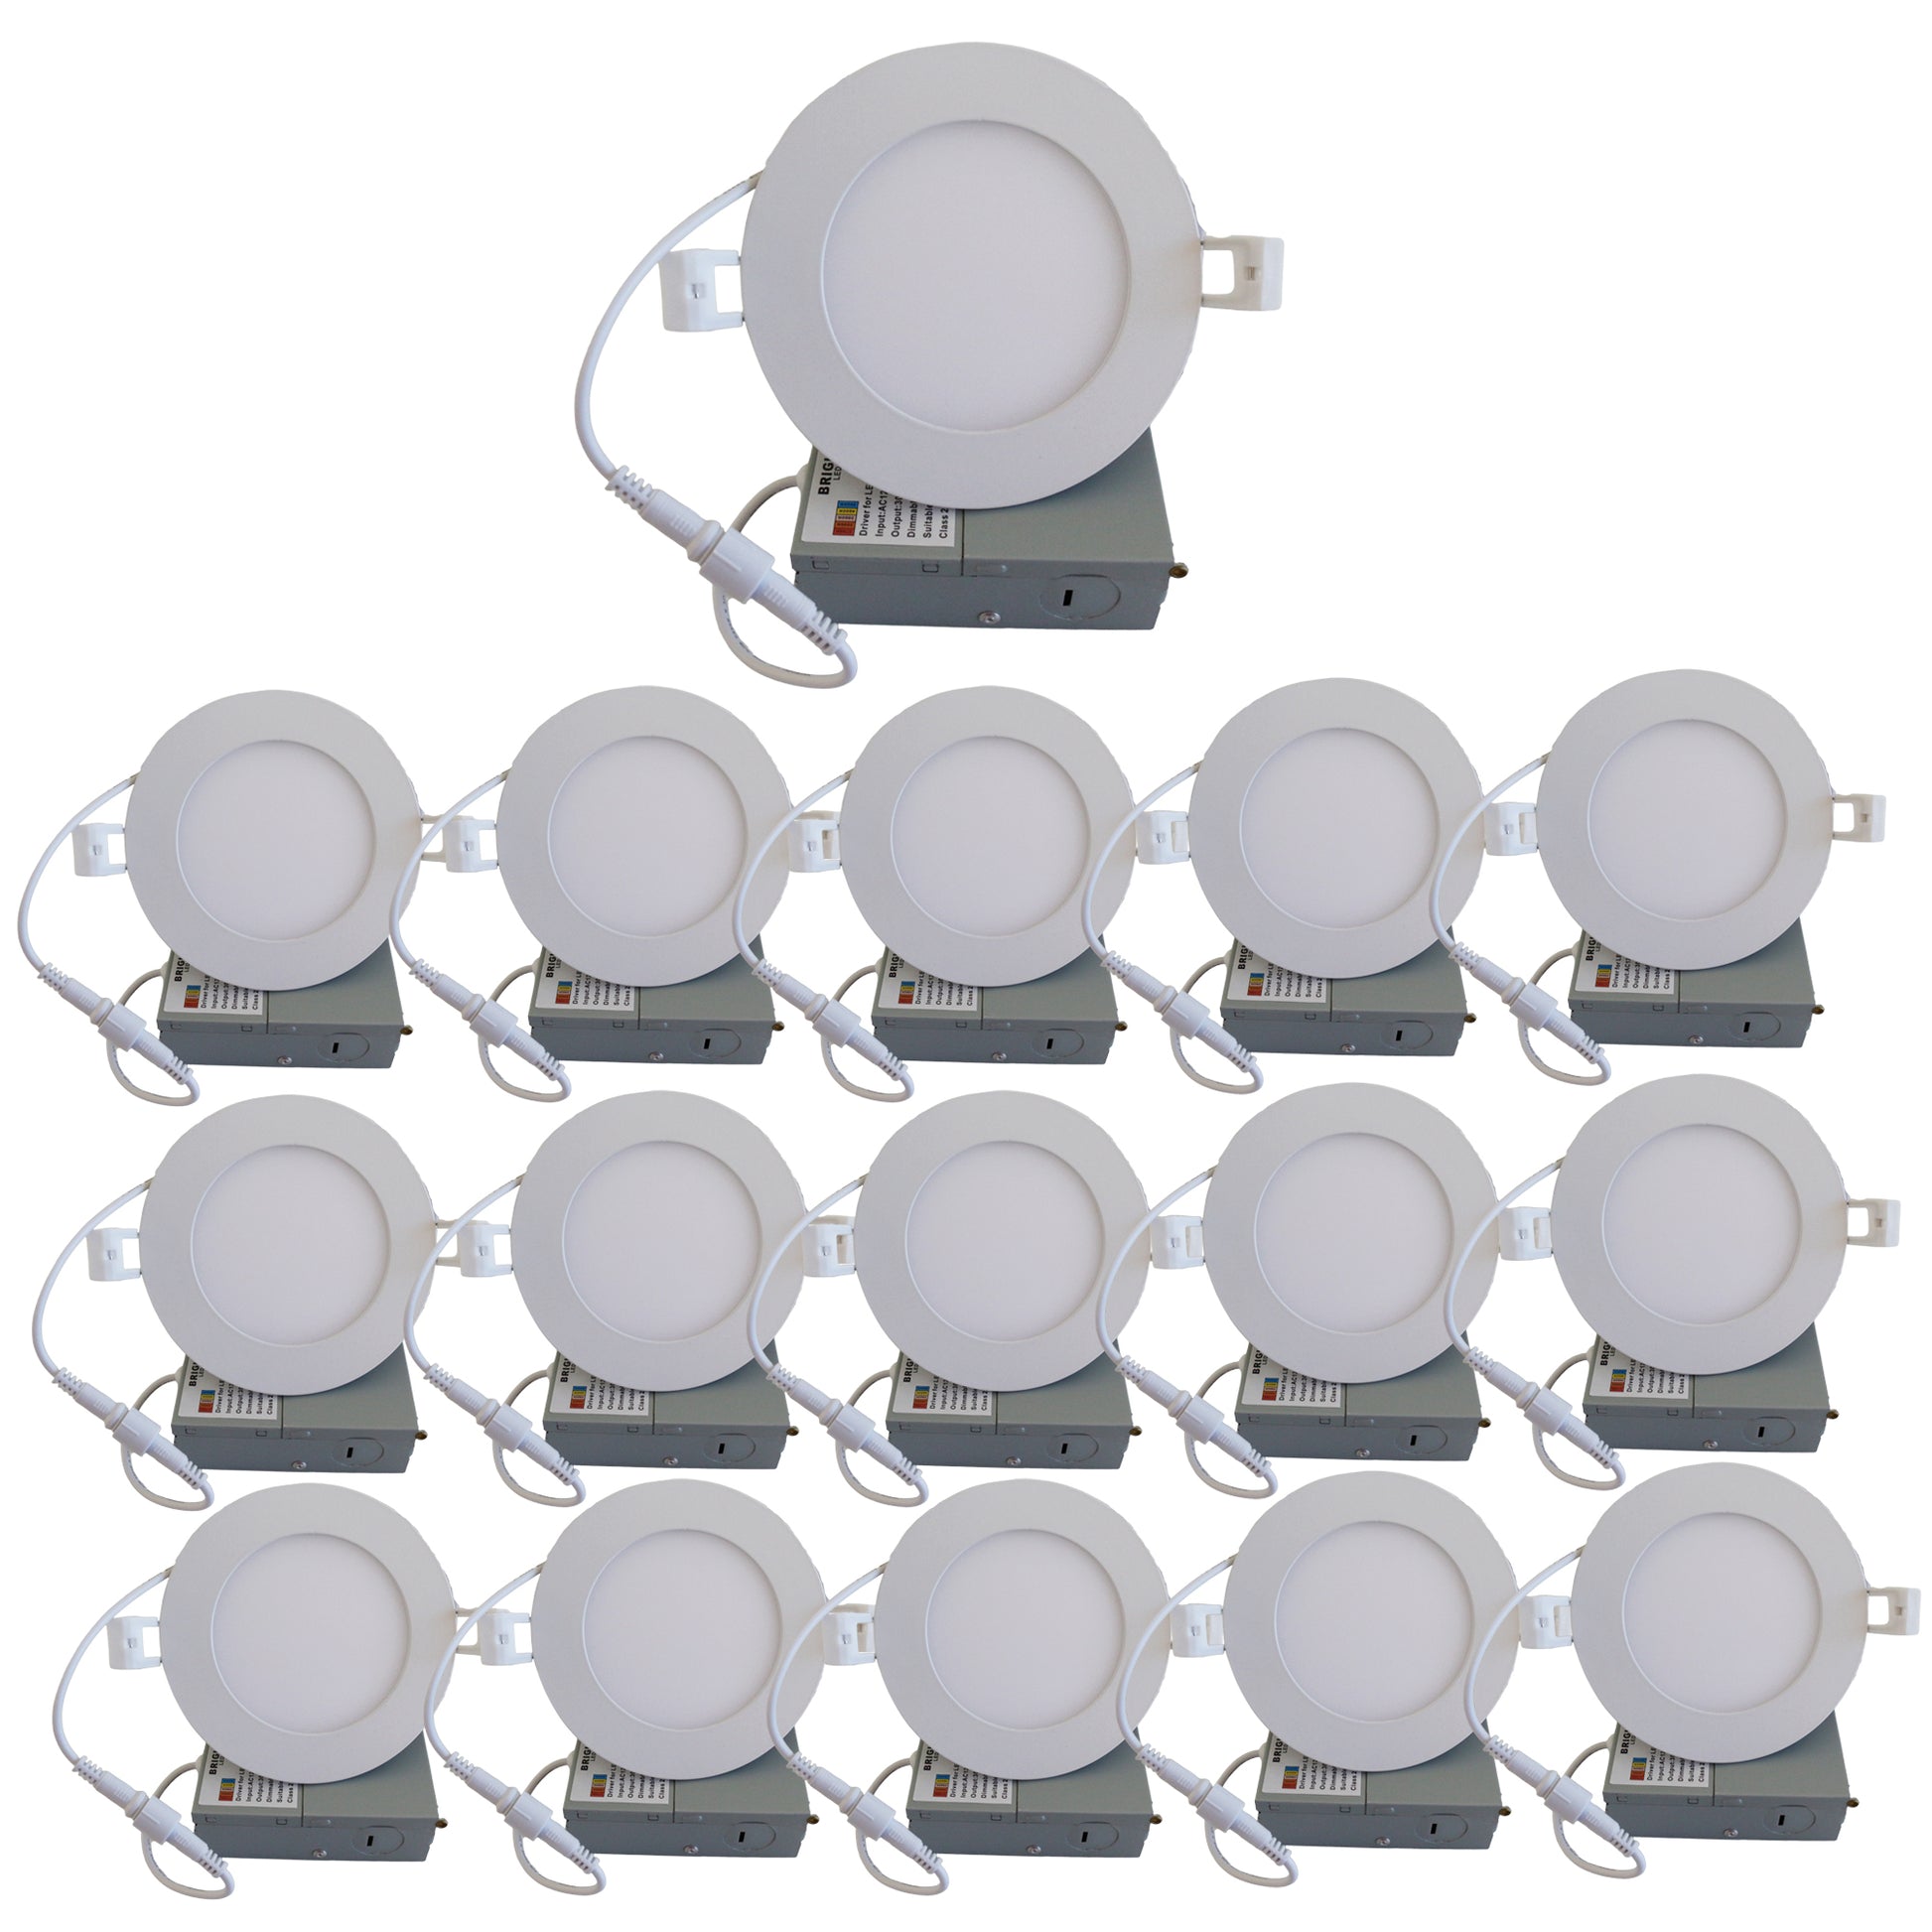 LED Recessed Lighting, 5CCT, 6 Inch, Dimmable - Energy Star ( Pack of 15 )